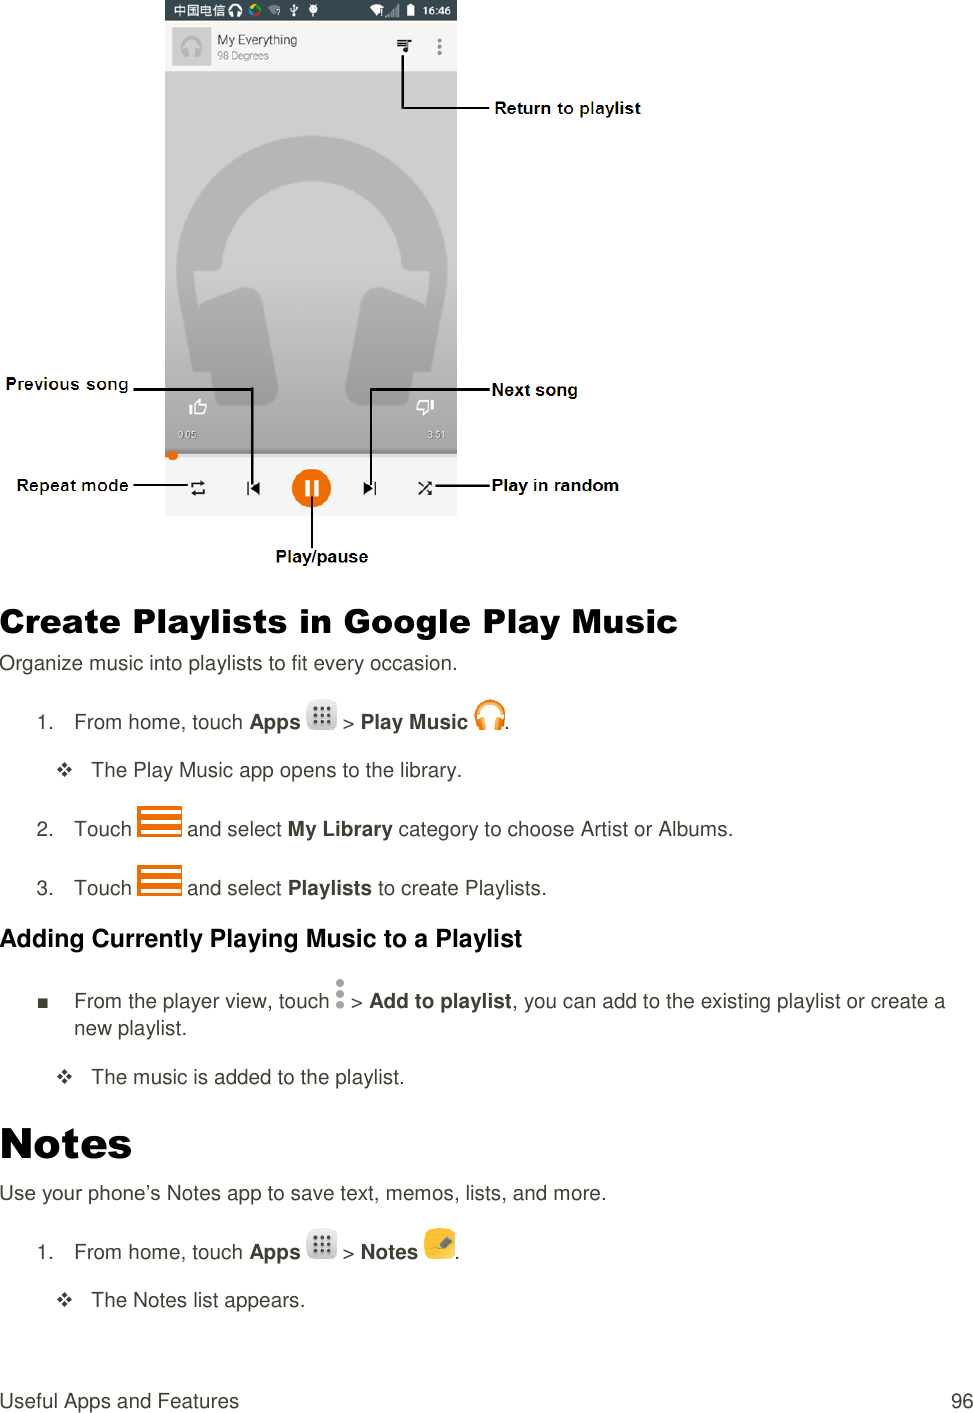 Useful Apps and Features  96  Create Playlists in Google Play Music Organize music into playlists to fit every occasion. 1.  From home, touch Apps   &gt; Play Music  .     The Play Music app opens to the library. 2.  Touch   and select My Library category to choose Artist or Albums. 3.  Touch   and select Playlists to create Playlists. Adding Currently Playing Music to a Playlist ■  From the player view, touch   &gt; Add to playlist, you can add to the existing playlist or create a new playlist.     The music is added to the playlist. Notes Use your phone’s Notes app to save text, memos, lists, and more. 1.  From home, touch Apps   &gt; Notes  .     The Notes list appears. 